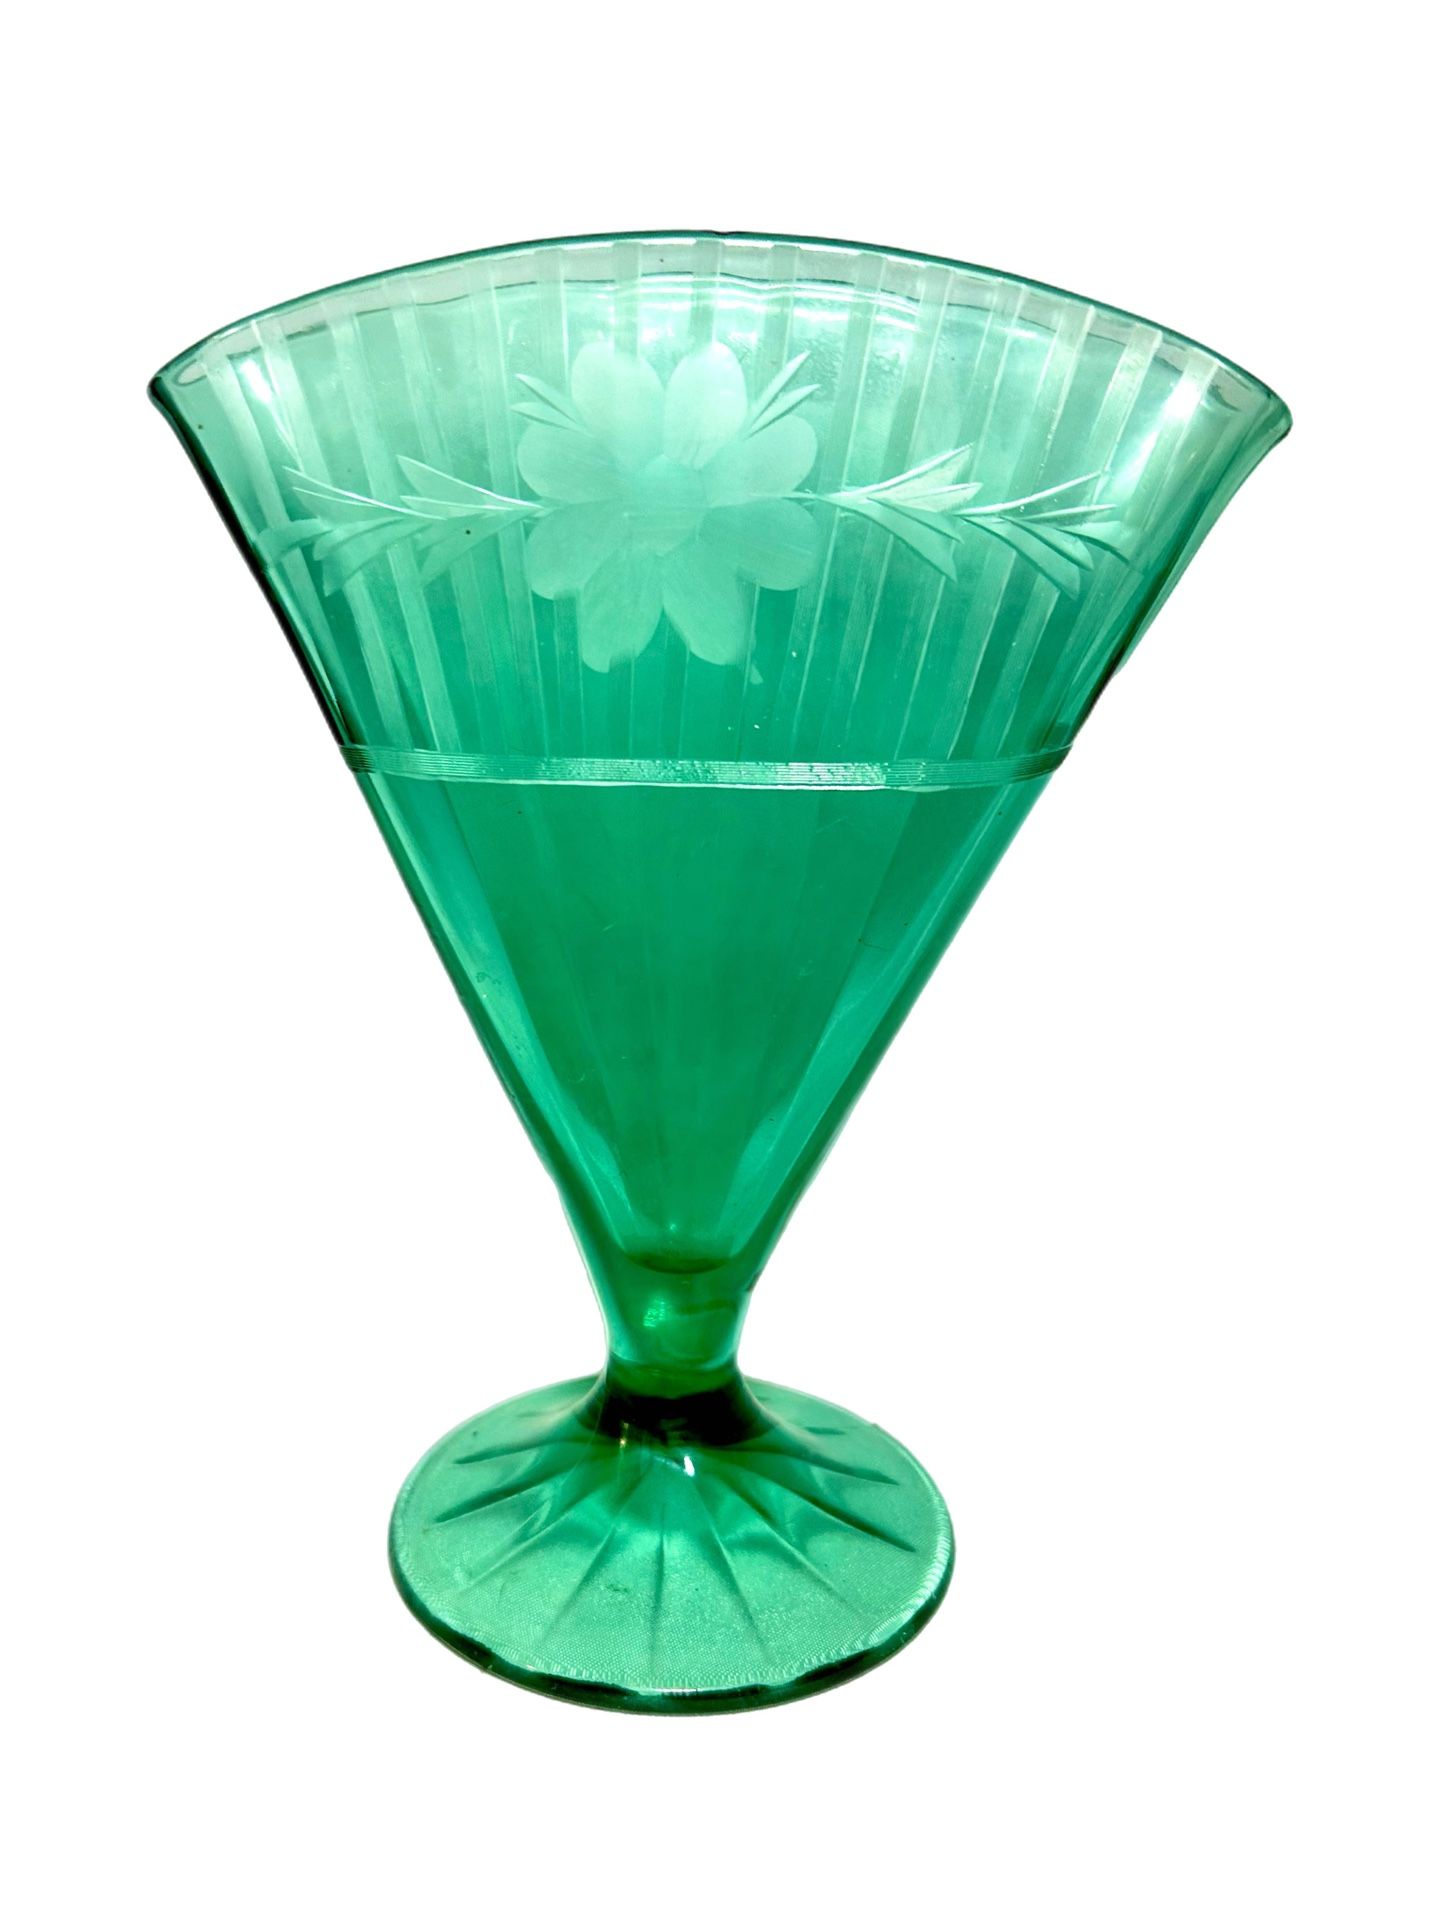 Beautiful green glass fan vase with etched floral design. Glows Under Black light. 